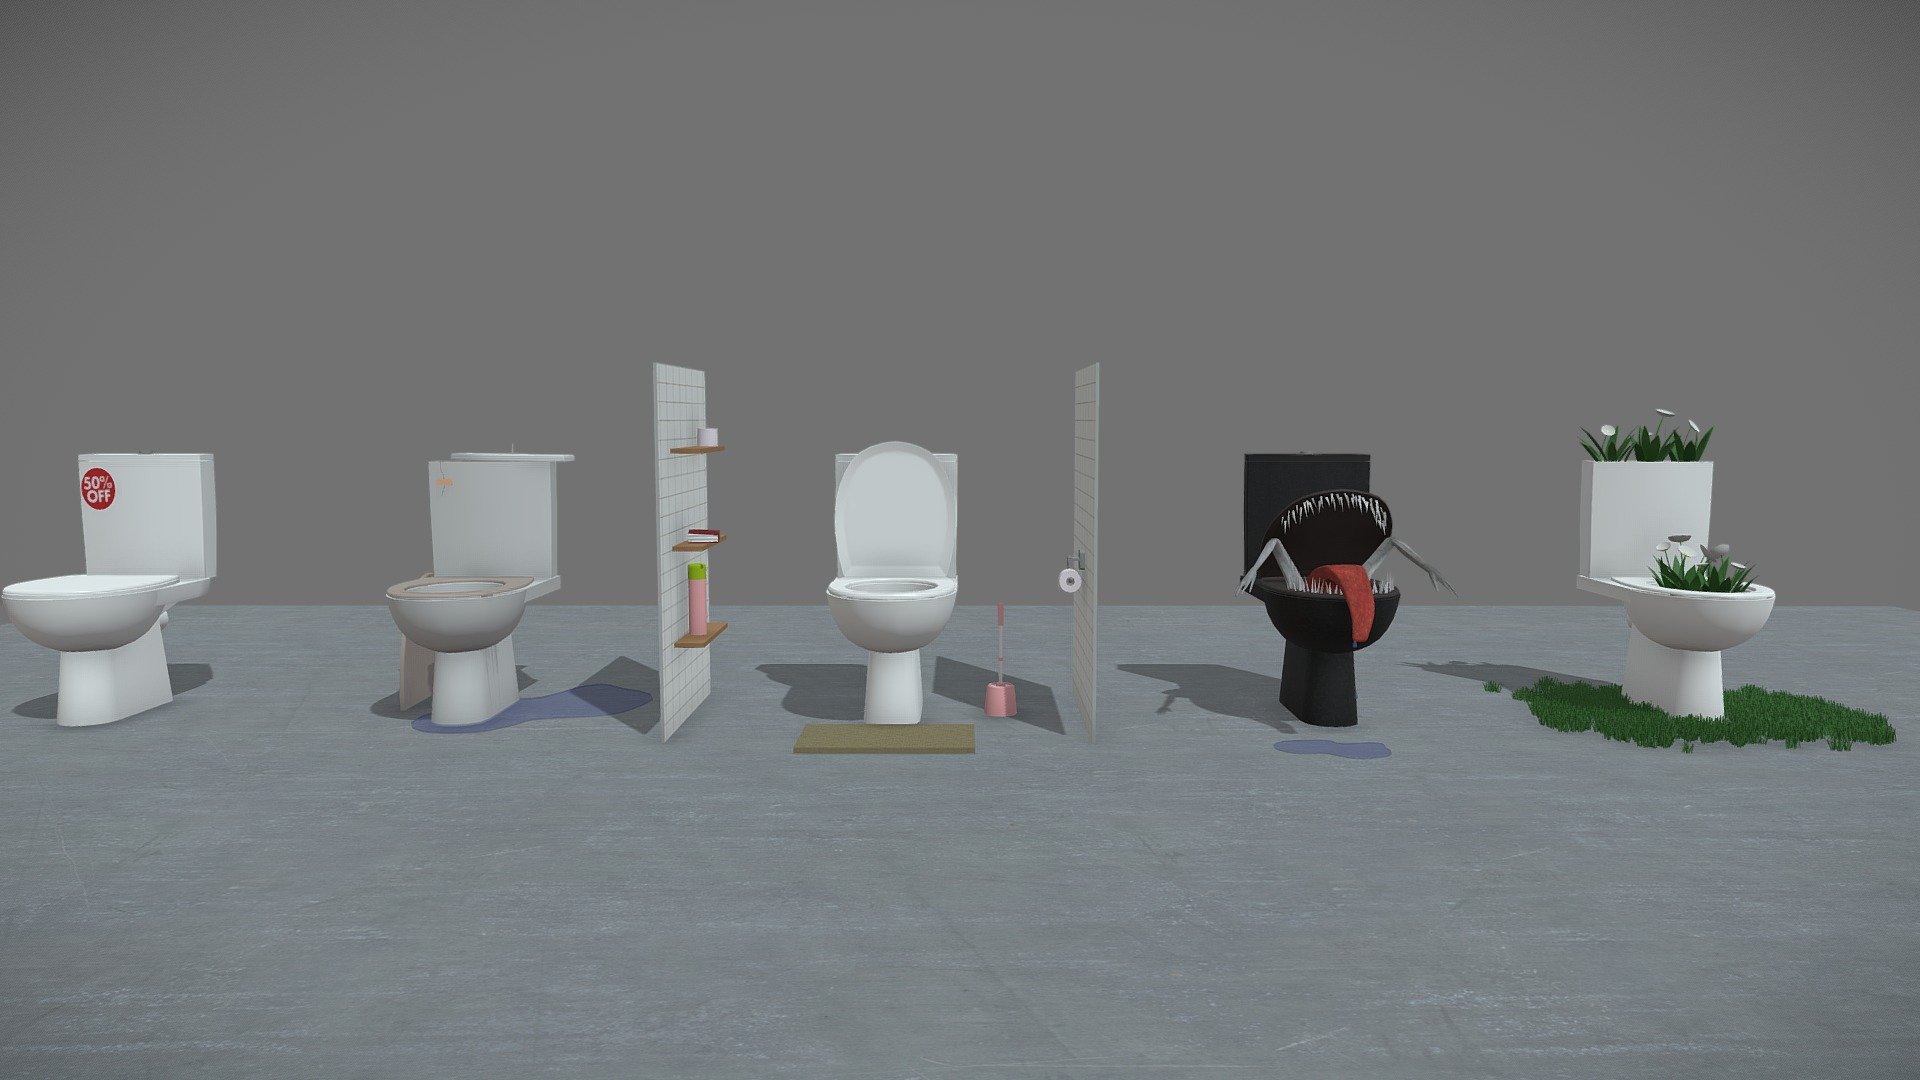 5 versions of toilets